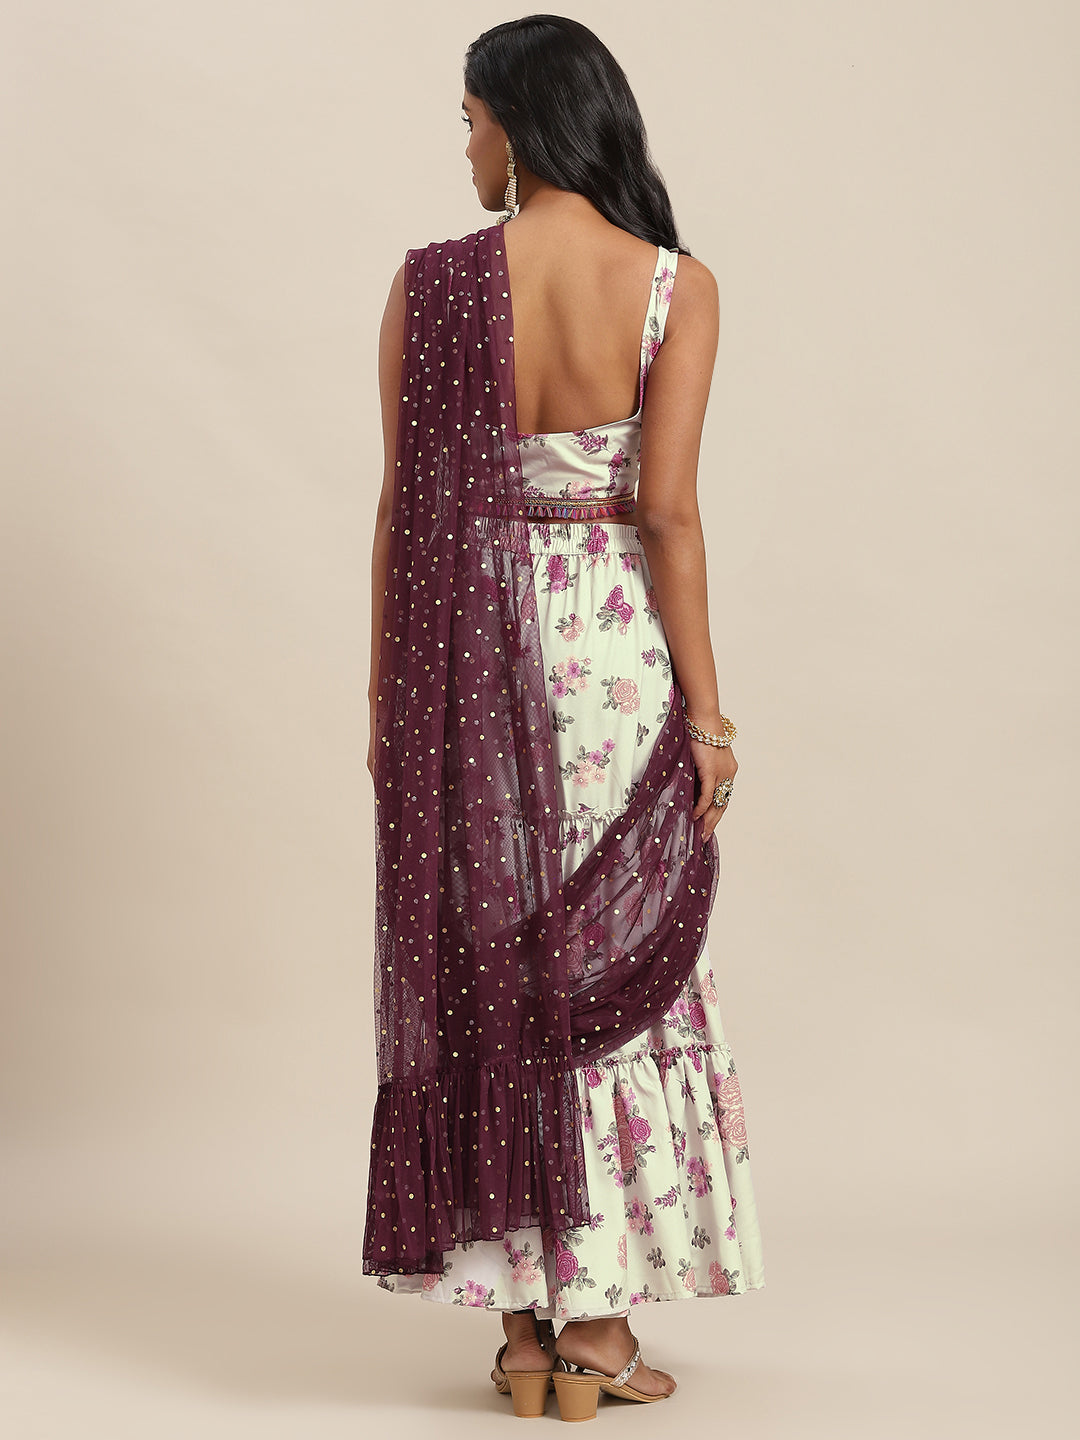 Cream & Maroon Floral Printed Draped Co-ord Sets